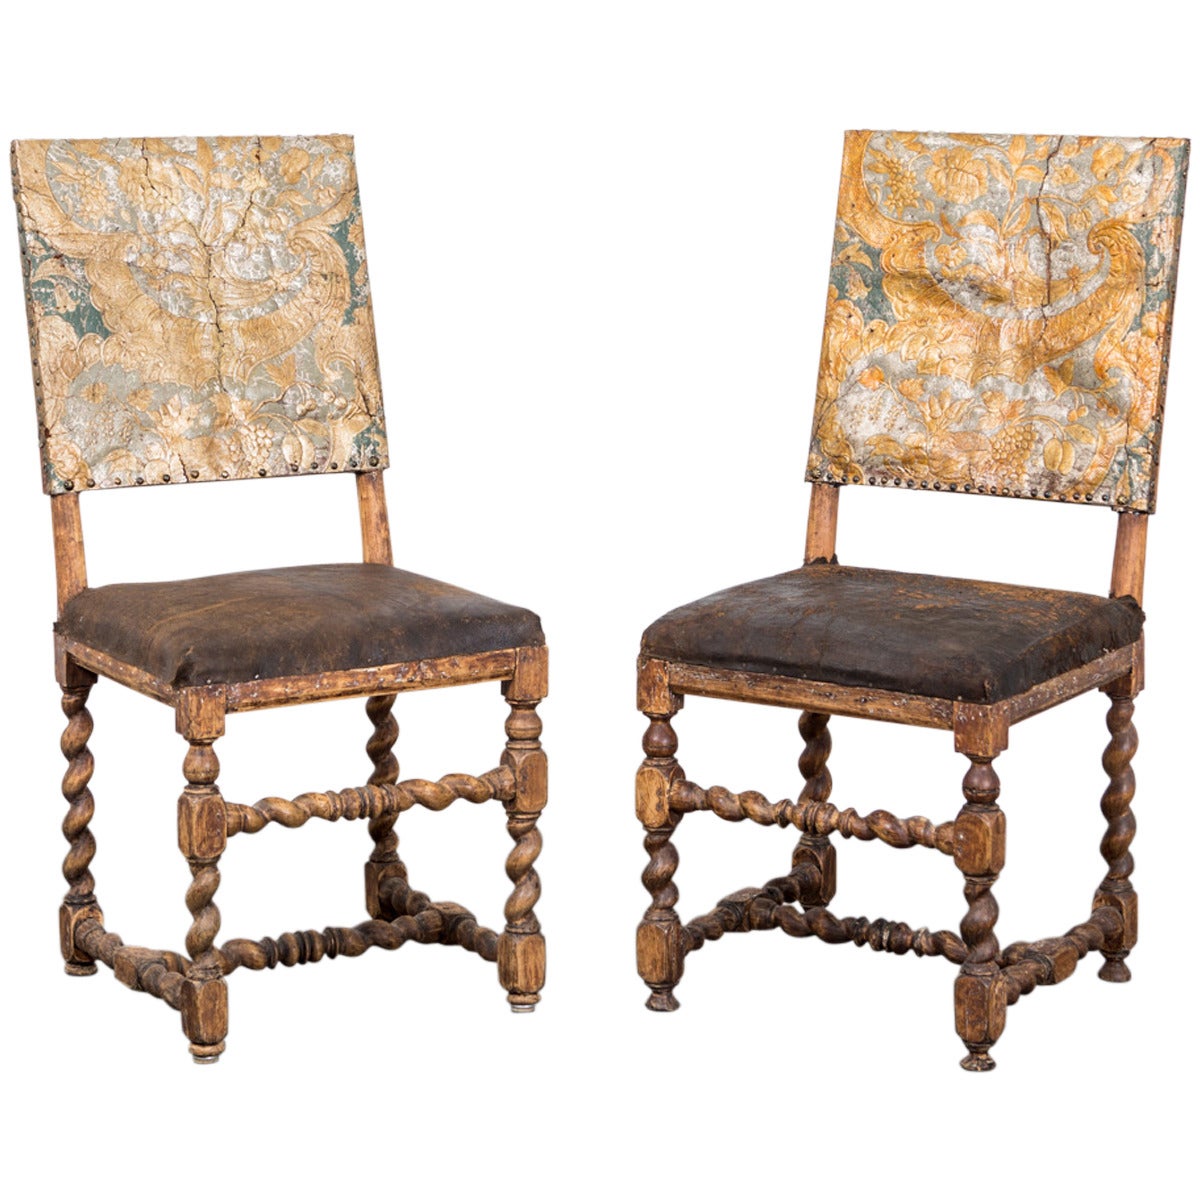 Chairs Pair Swedish Baroque Period 18th Century Sweden. A pair of exquisite side chairs made in Sweden during the Baroque period 1650-1750. Original gilt leather on the back splat. Straight frame on serpentine legs with a serpentine foot cross.